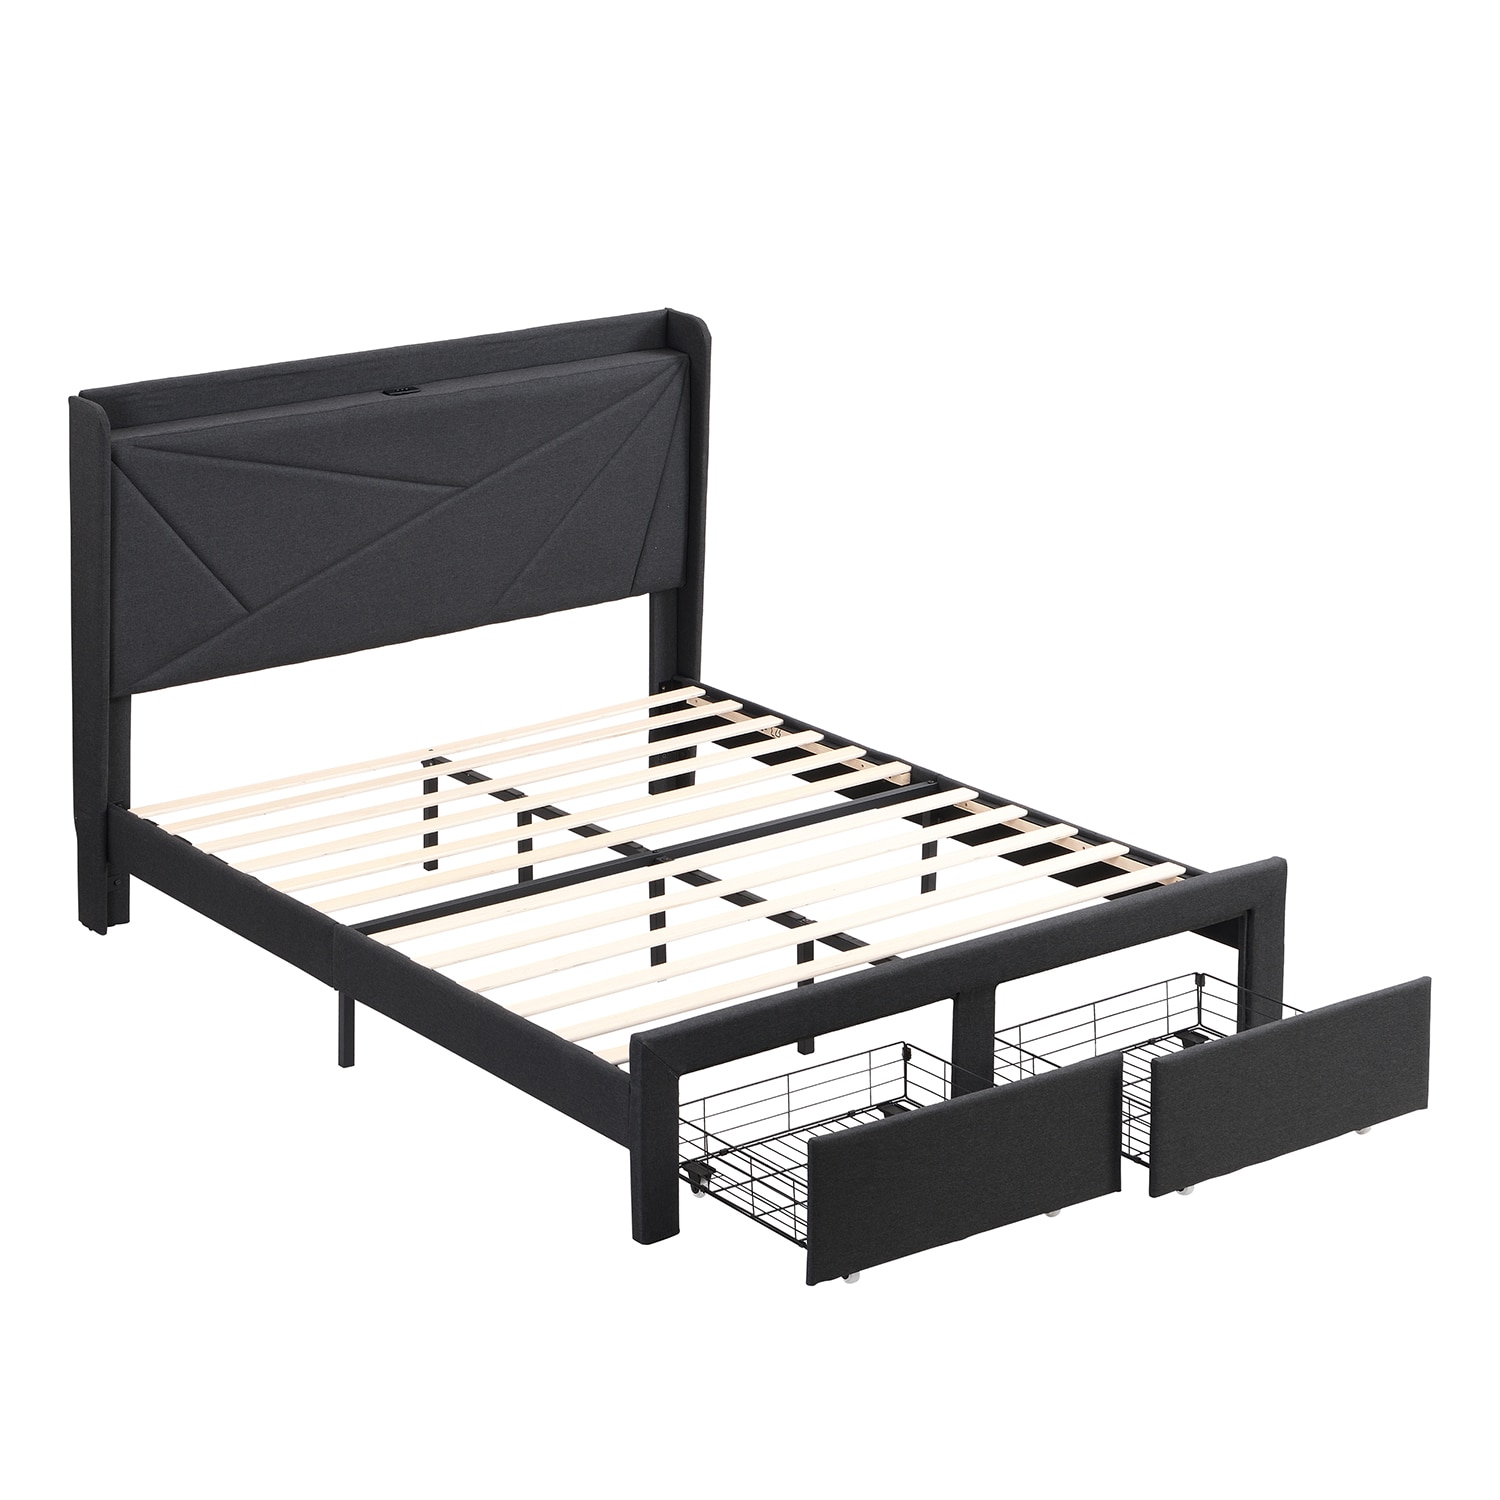 GZMR Queen Size Bed Frame with 2 Storage Drawers Dark Gray Queen Wood ...